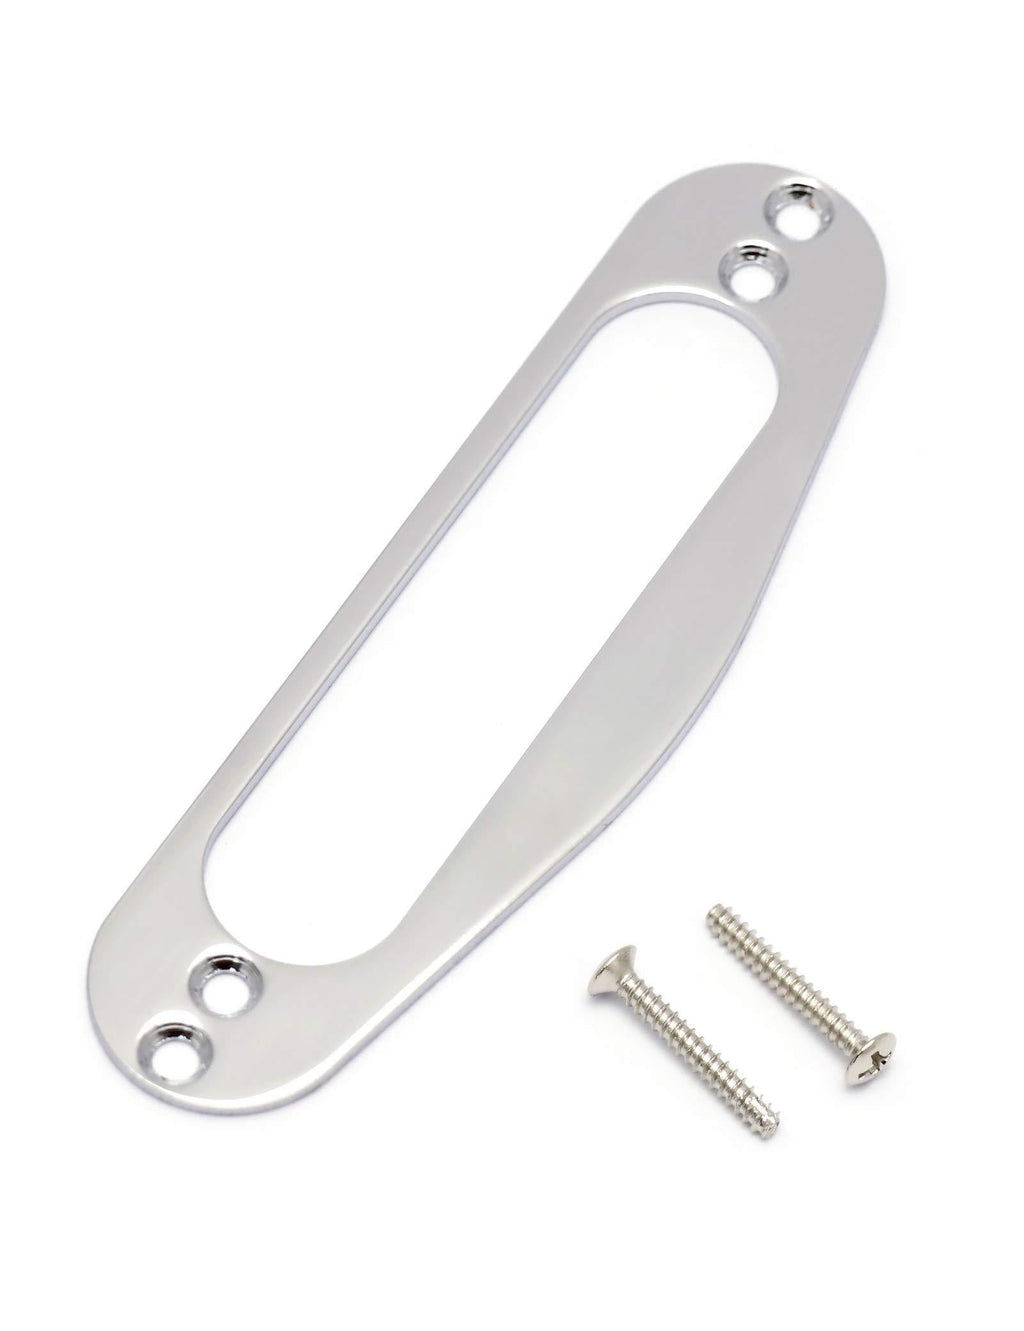 Holmer Metal Pickup Mounting Ring with Screws Compatible with Fender Tele Telecaster Single Coil Pickups. MR004